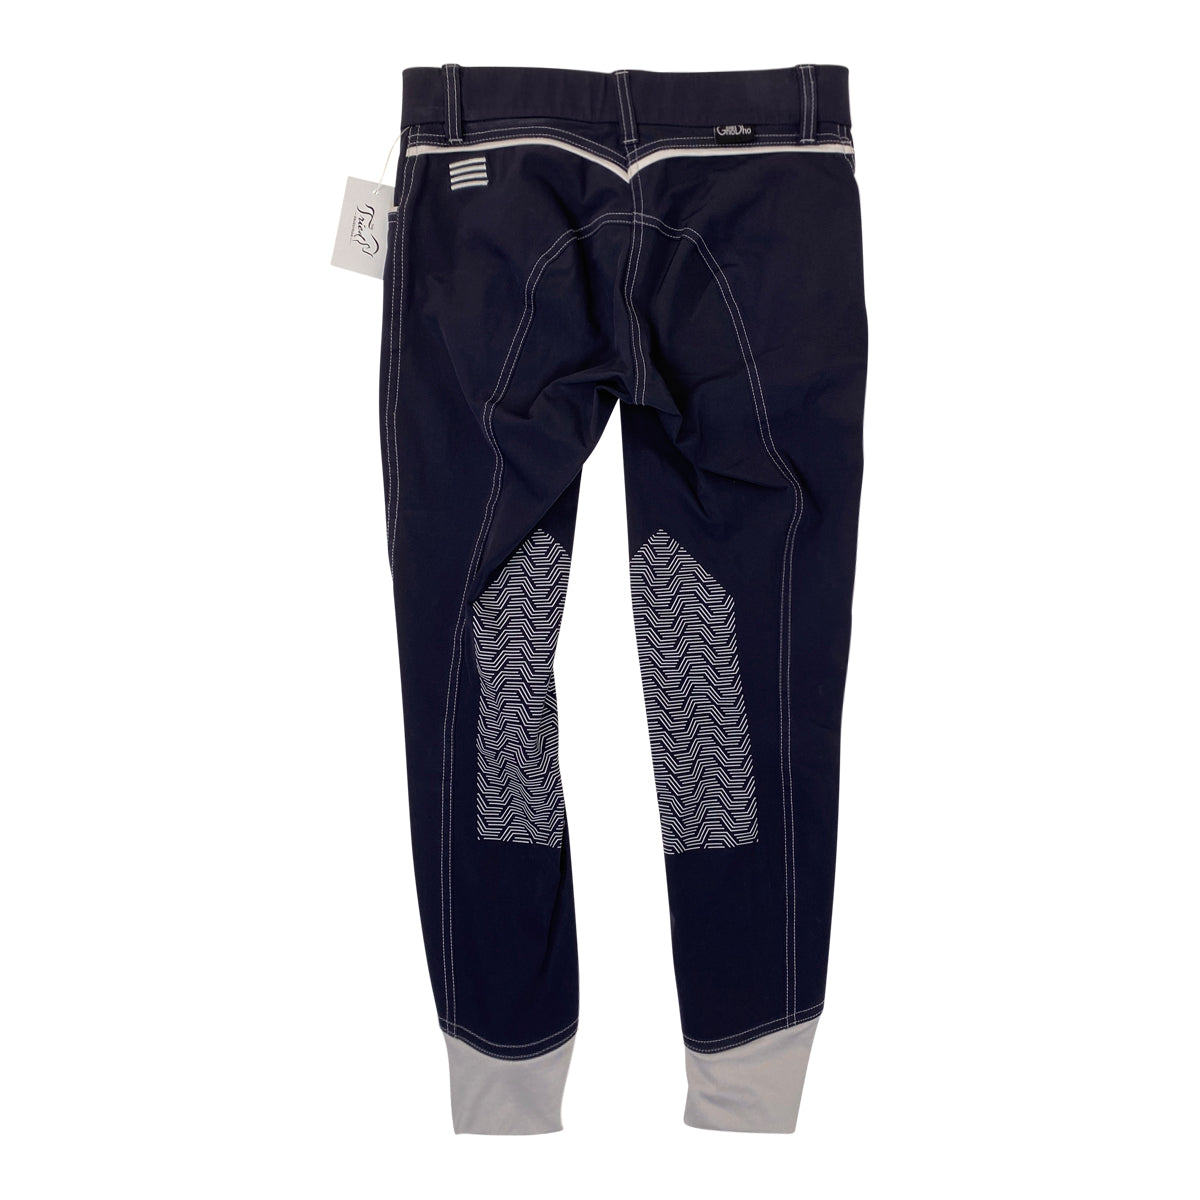 Ghodho 'Elara' Knee Patch Breeches in Navy w/White Piping